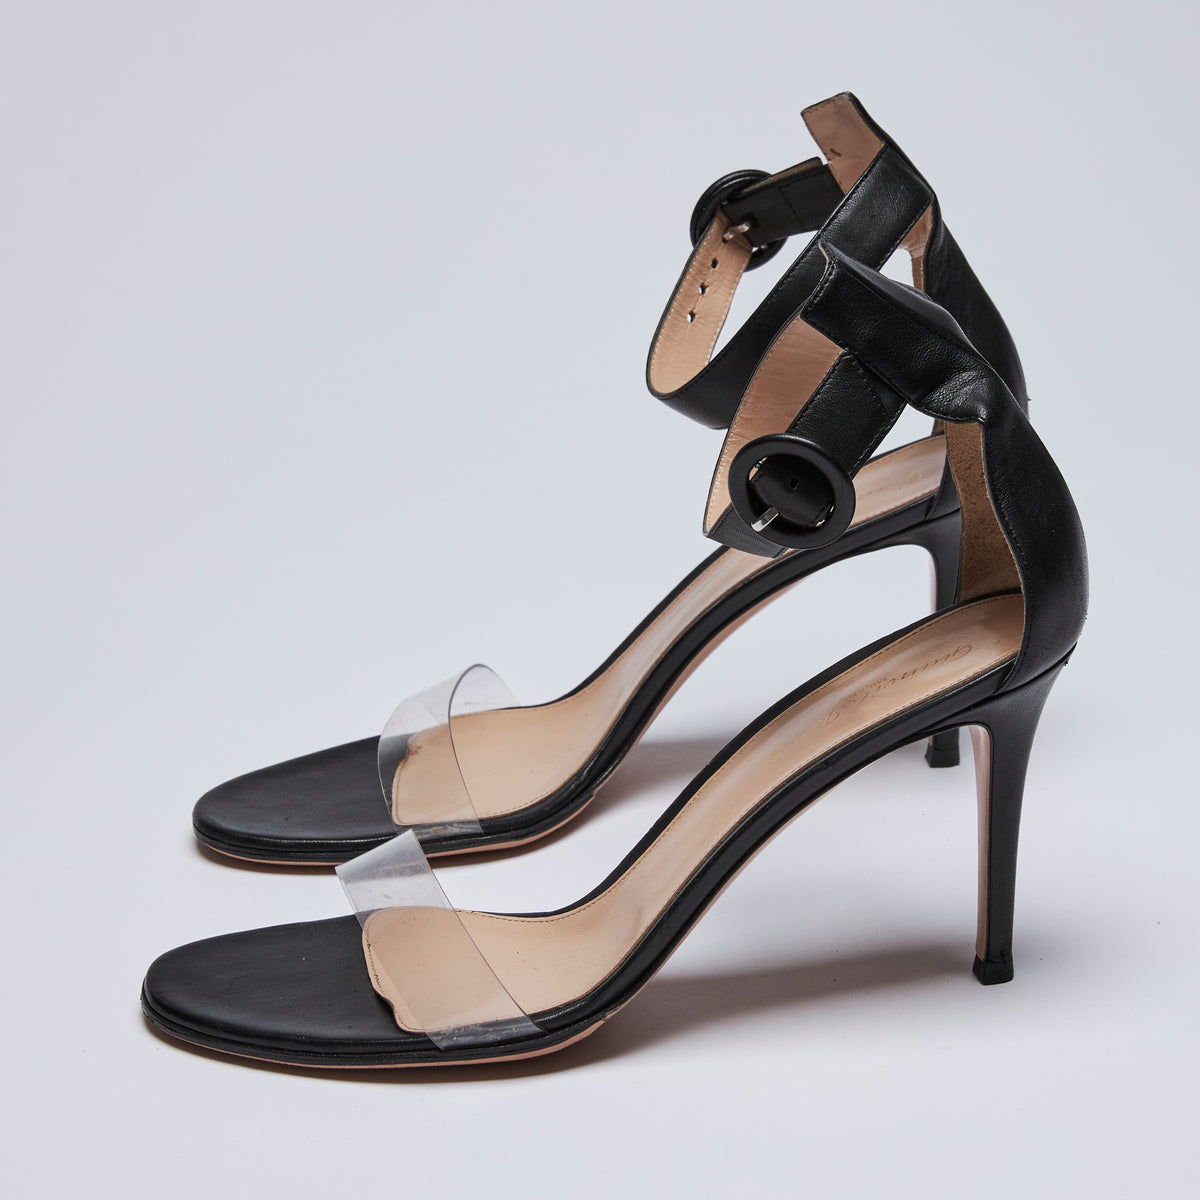 Pre-Loved Black Leather and Clear PVC Strappy Sandals with Ankle Strap.(side)